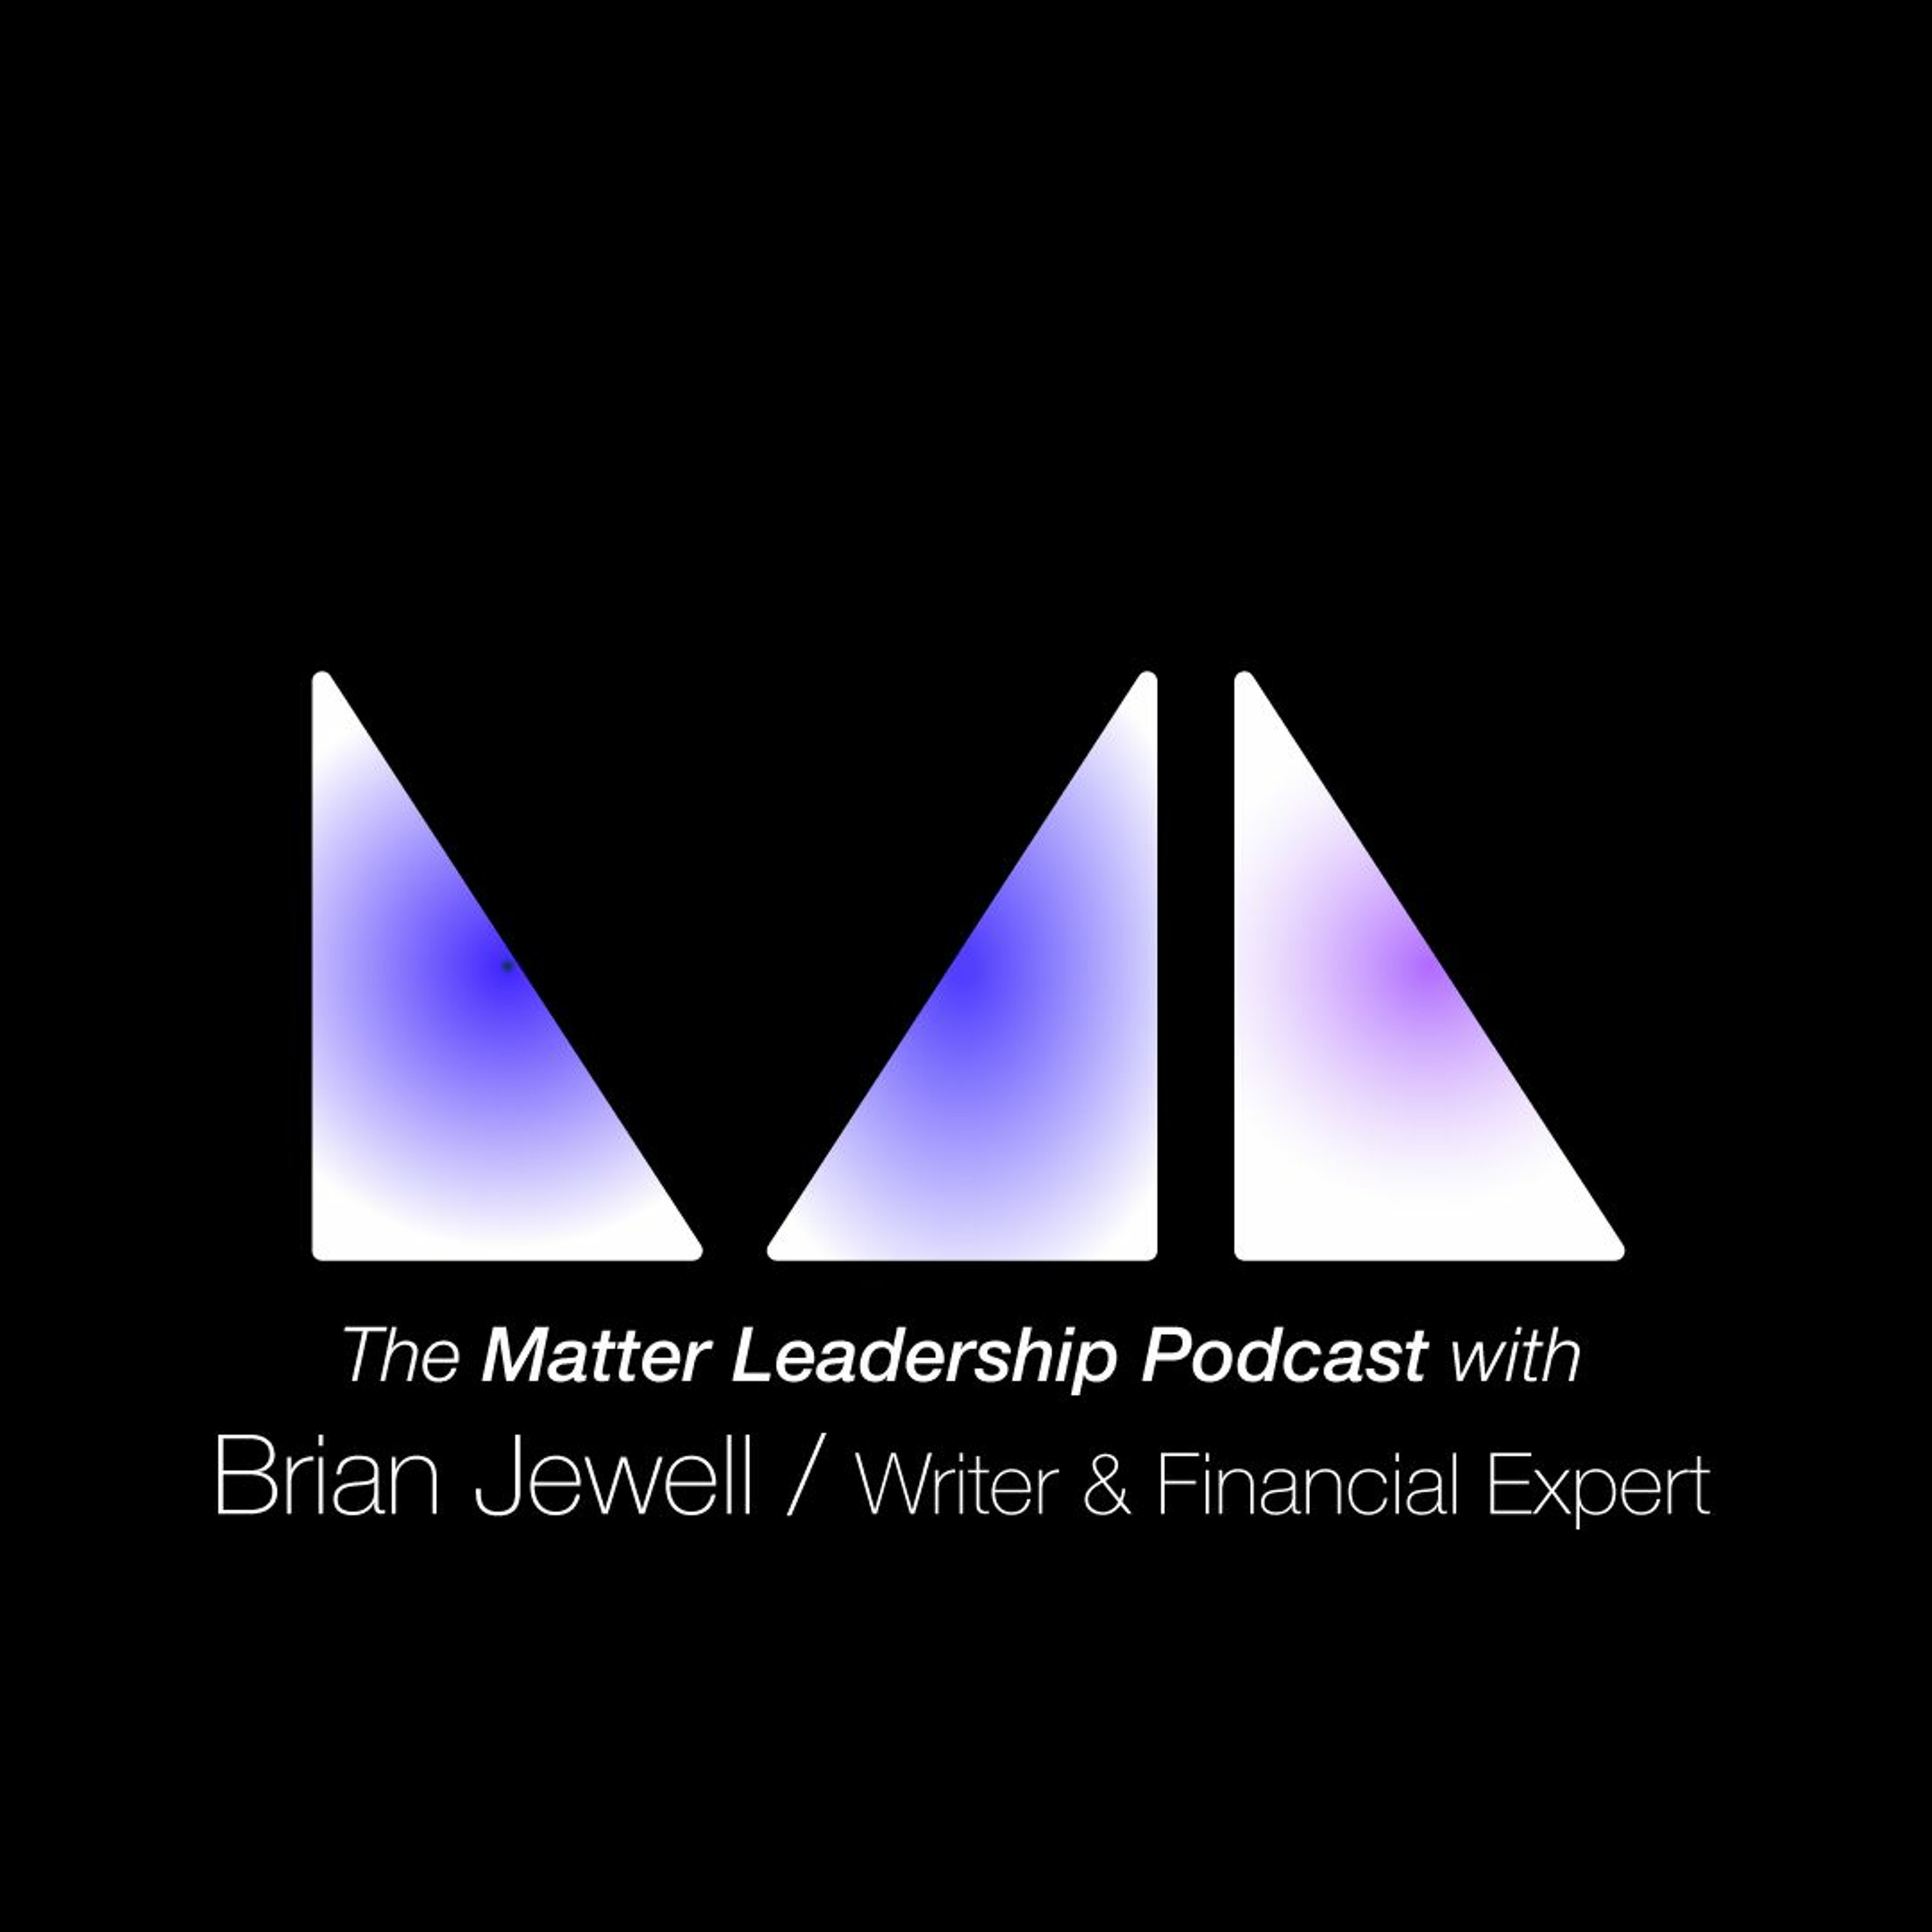 The Matter Leadership Podcast: Brian Jewell / Writer, Media Personality, & Financial Expert